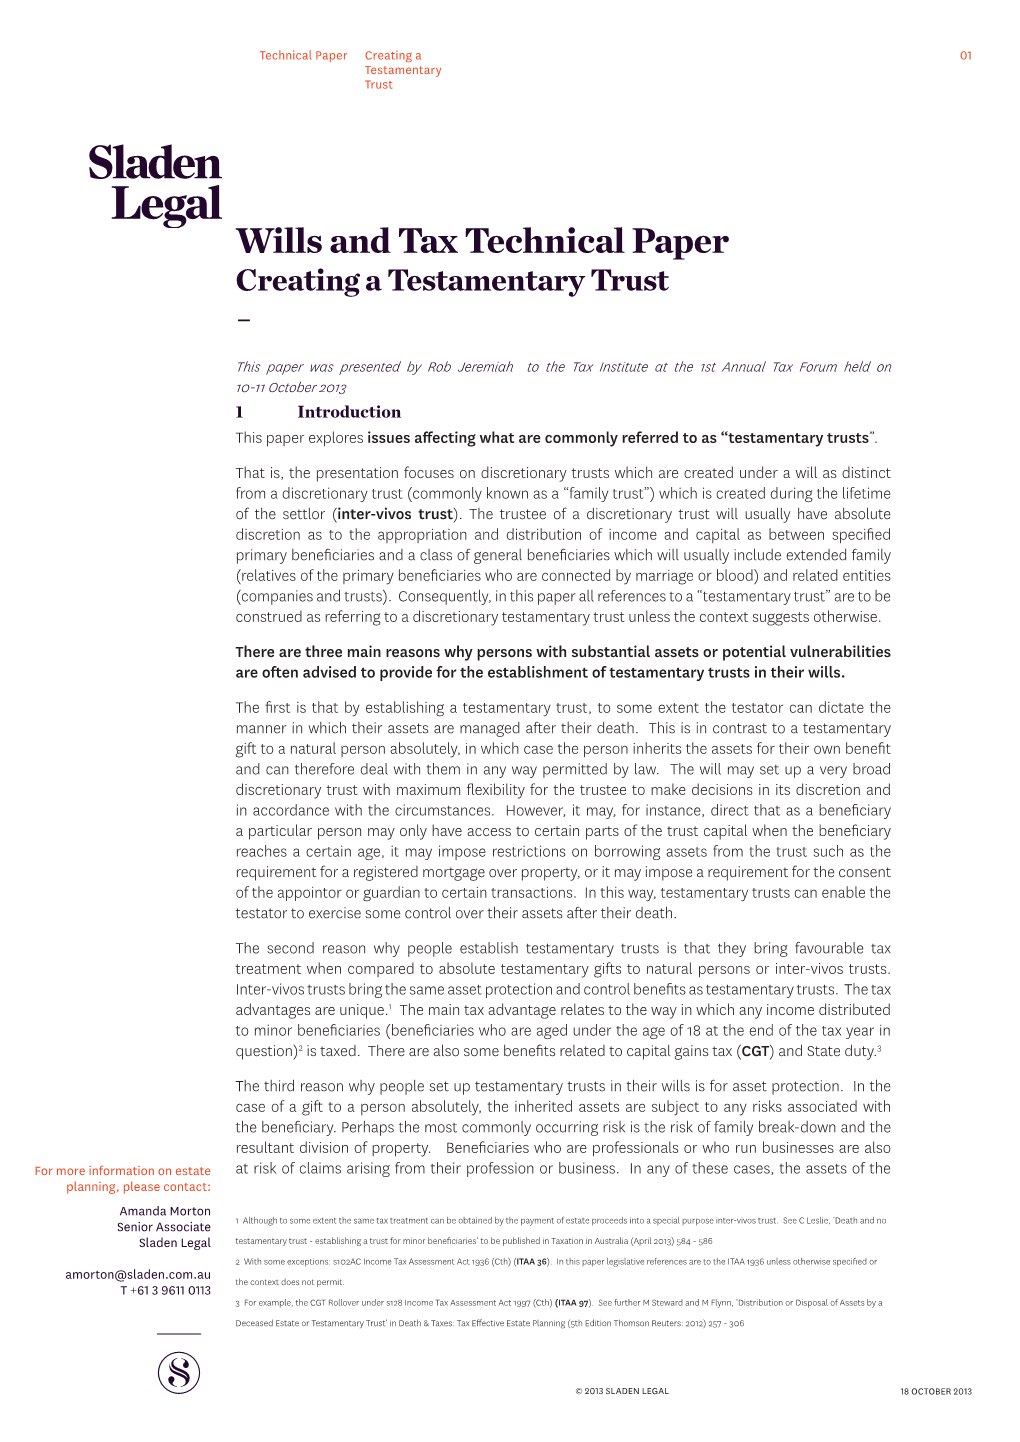 Wills and Tax Technical Paper Creating a Testamentary Trust